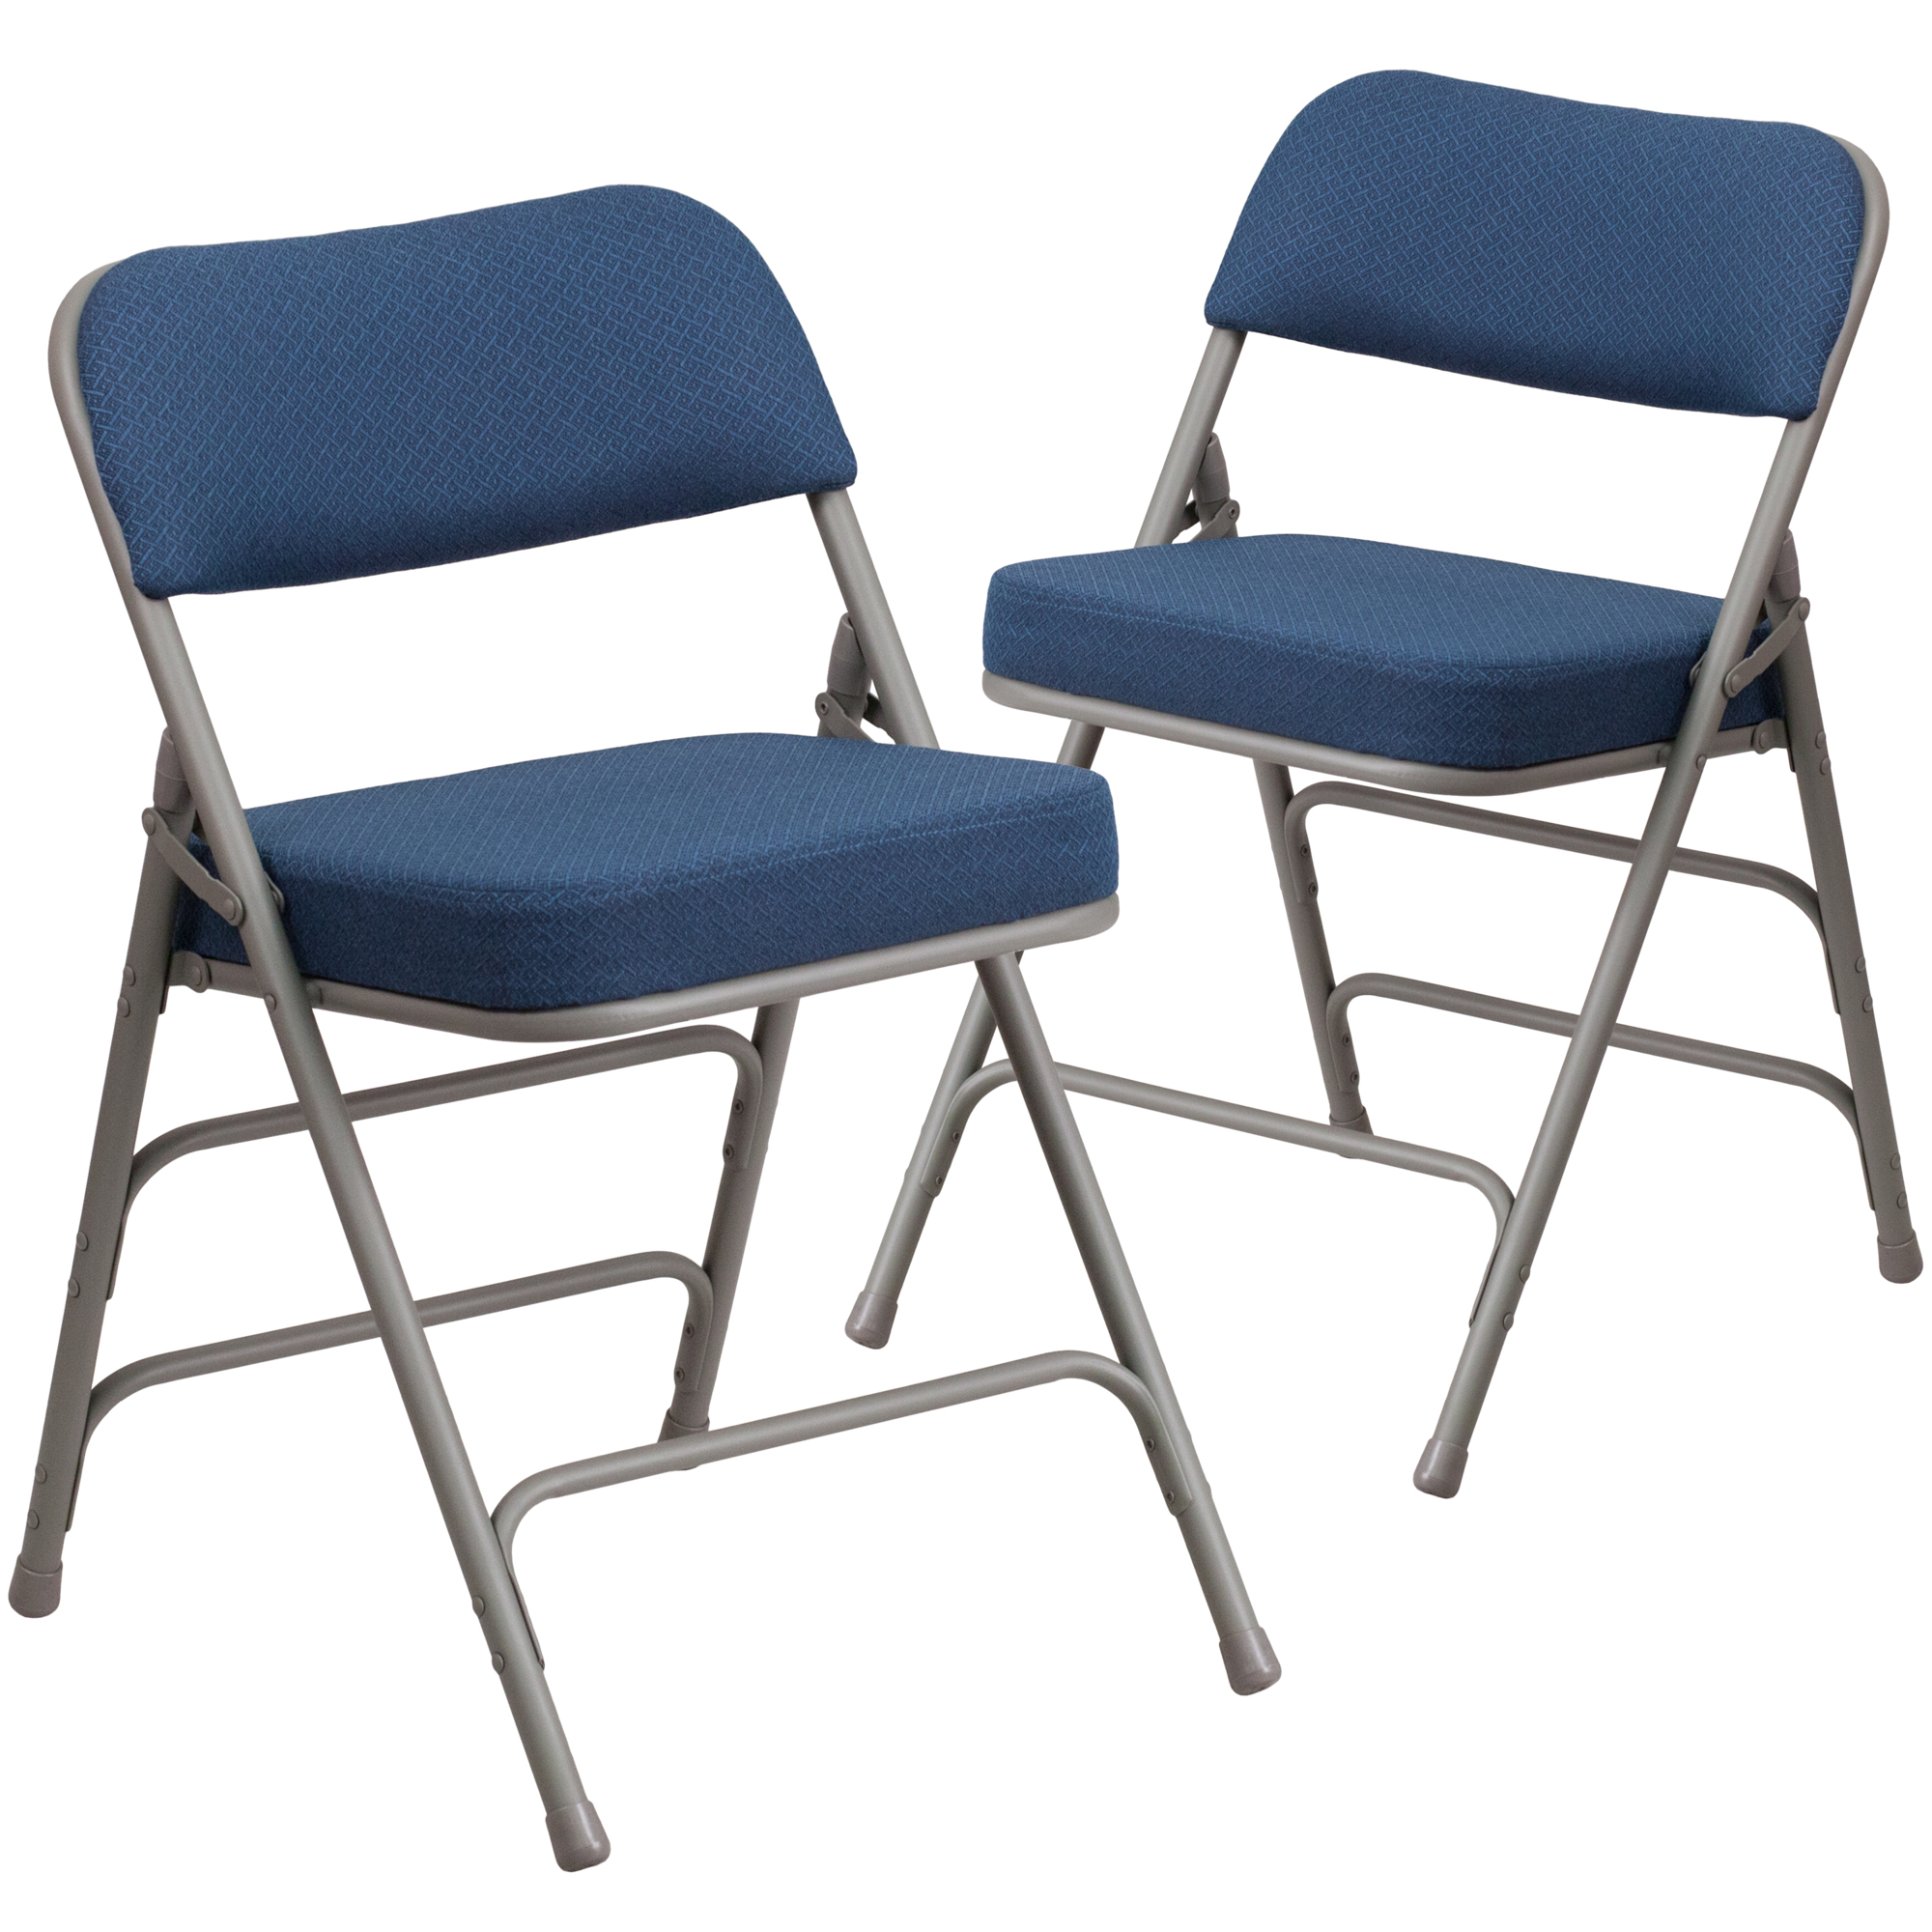 Flash Furniture, 2 Pack 18Inch W Curved Navy Fabric Metal Folding Chair, Primary Color Blue, Included (qty.) 2, Model 2AWMC320AFNVY